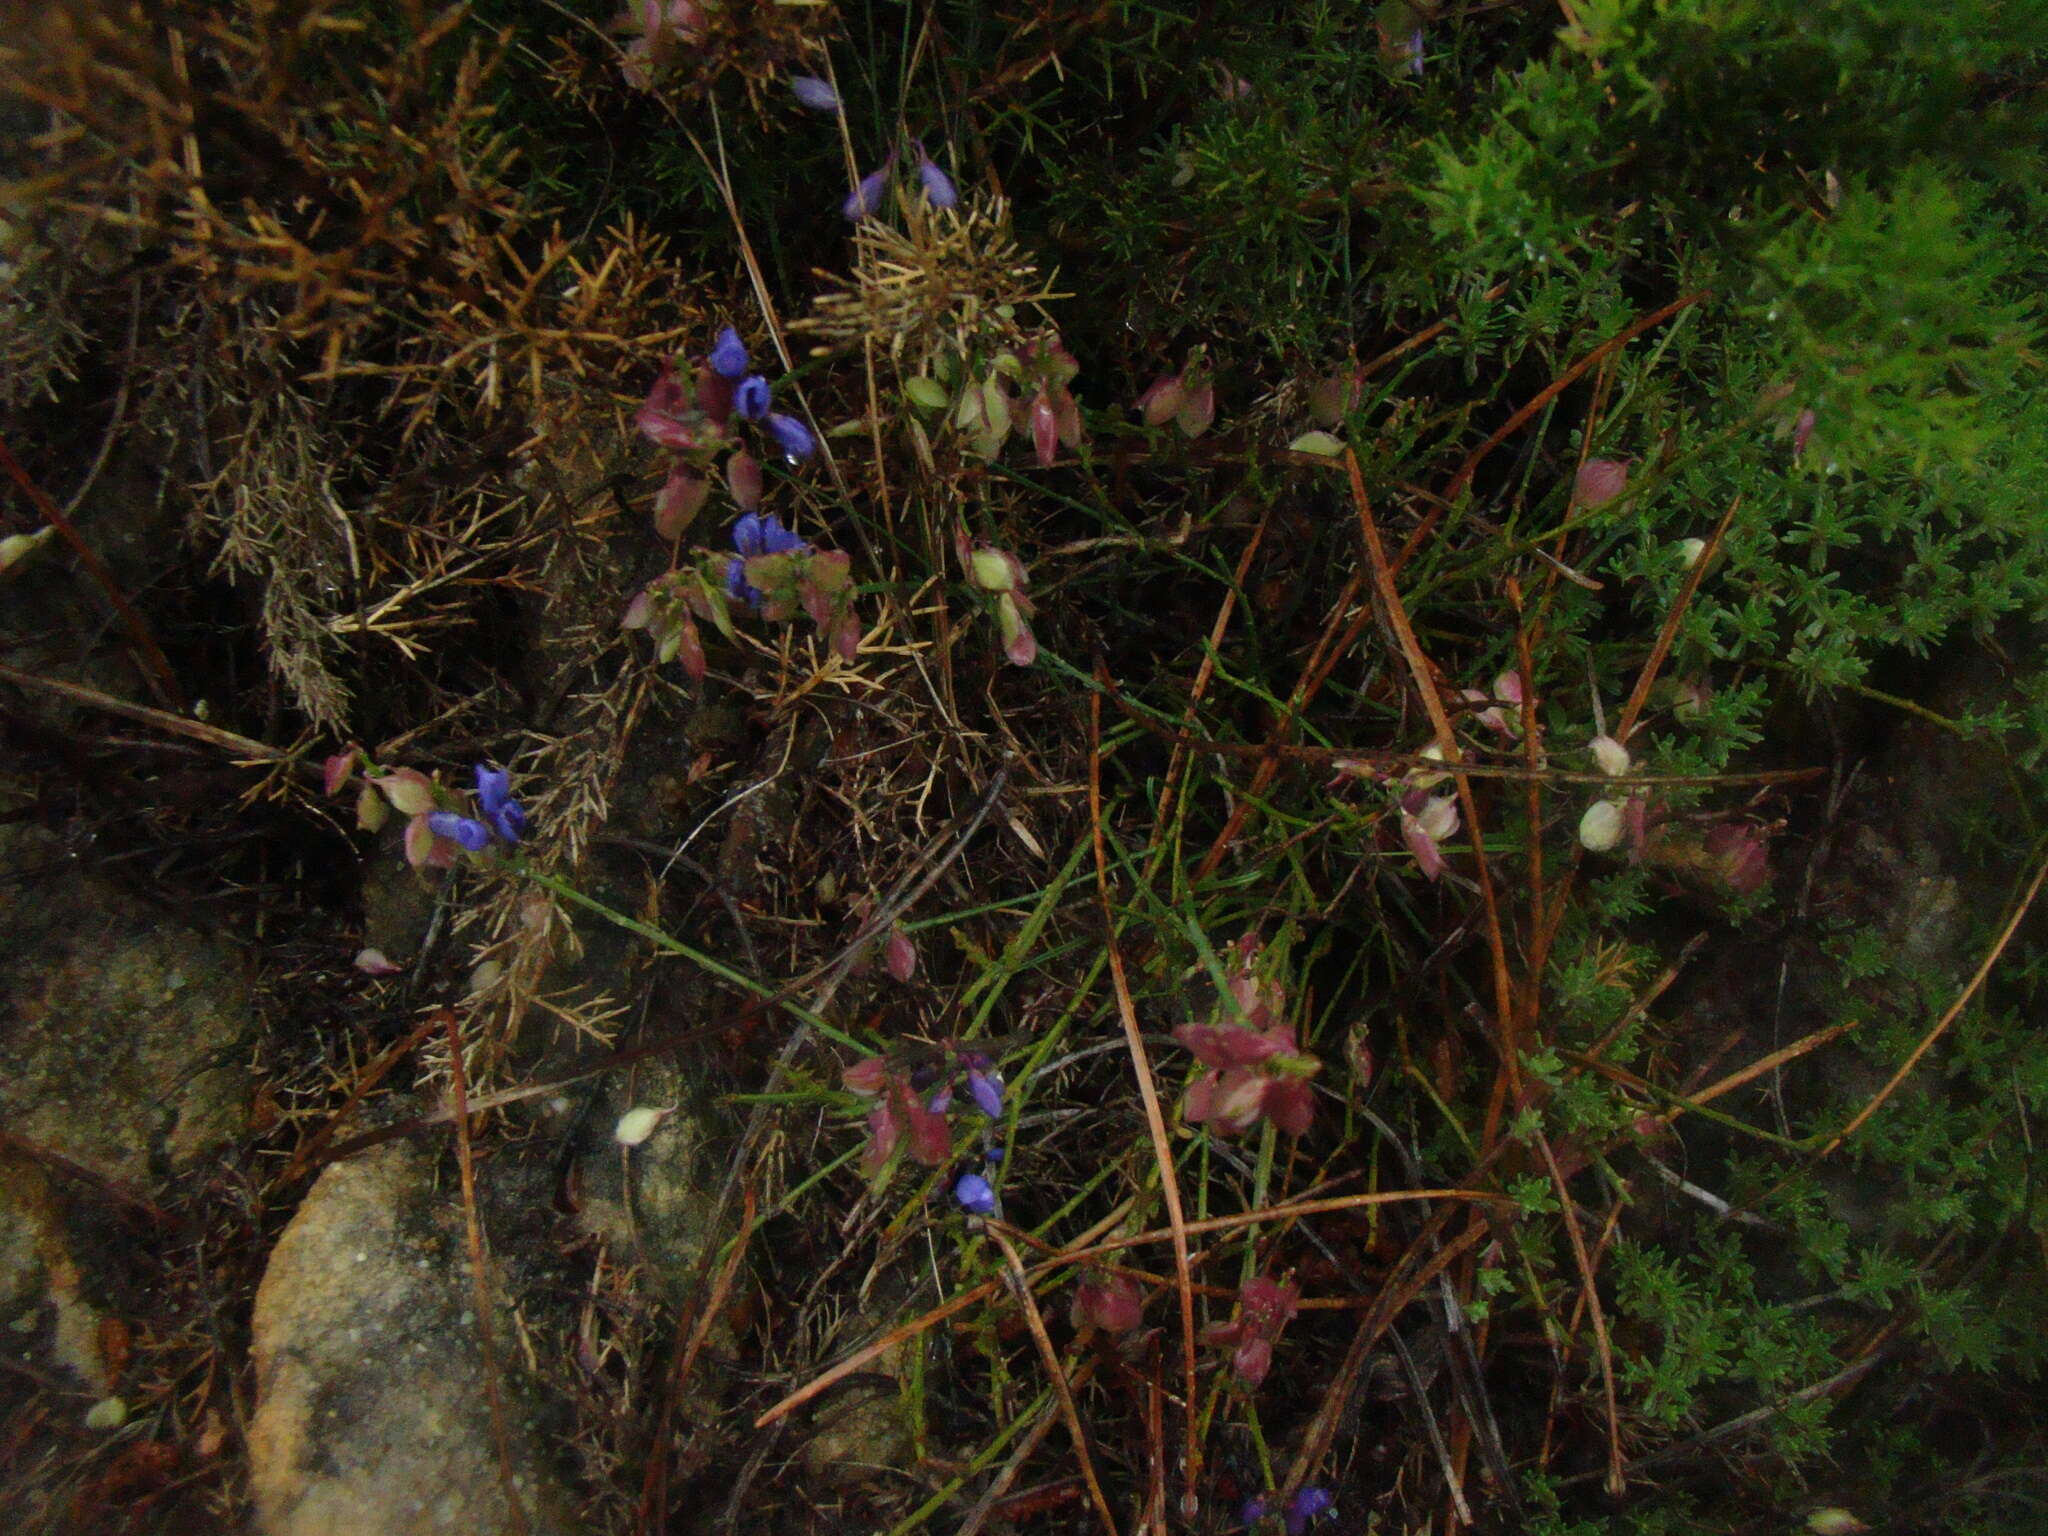 Image of Polygala microphylla L.